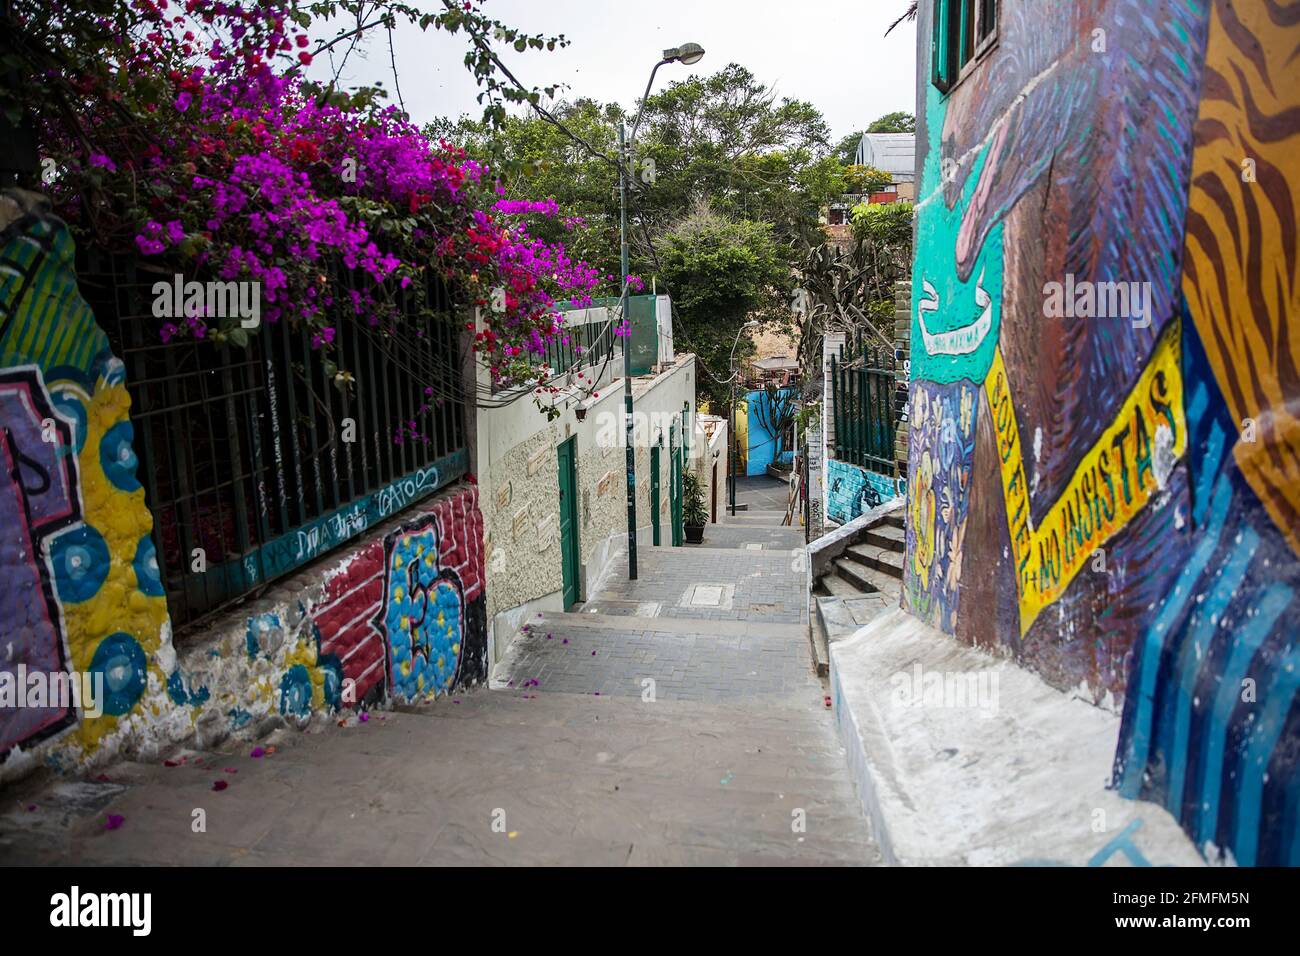 LIMA, PERU - DECEMBER 29, 2017: Street art at Barranco district, Lima. This district is considered to be the city's most romantic and bohemian. Stock Photo